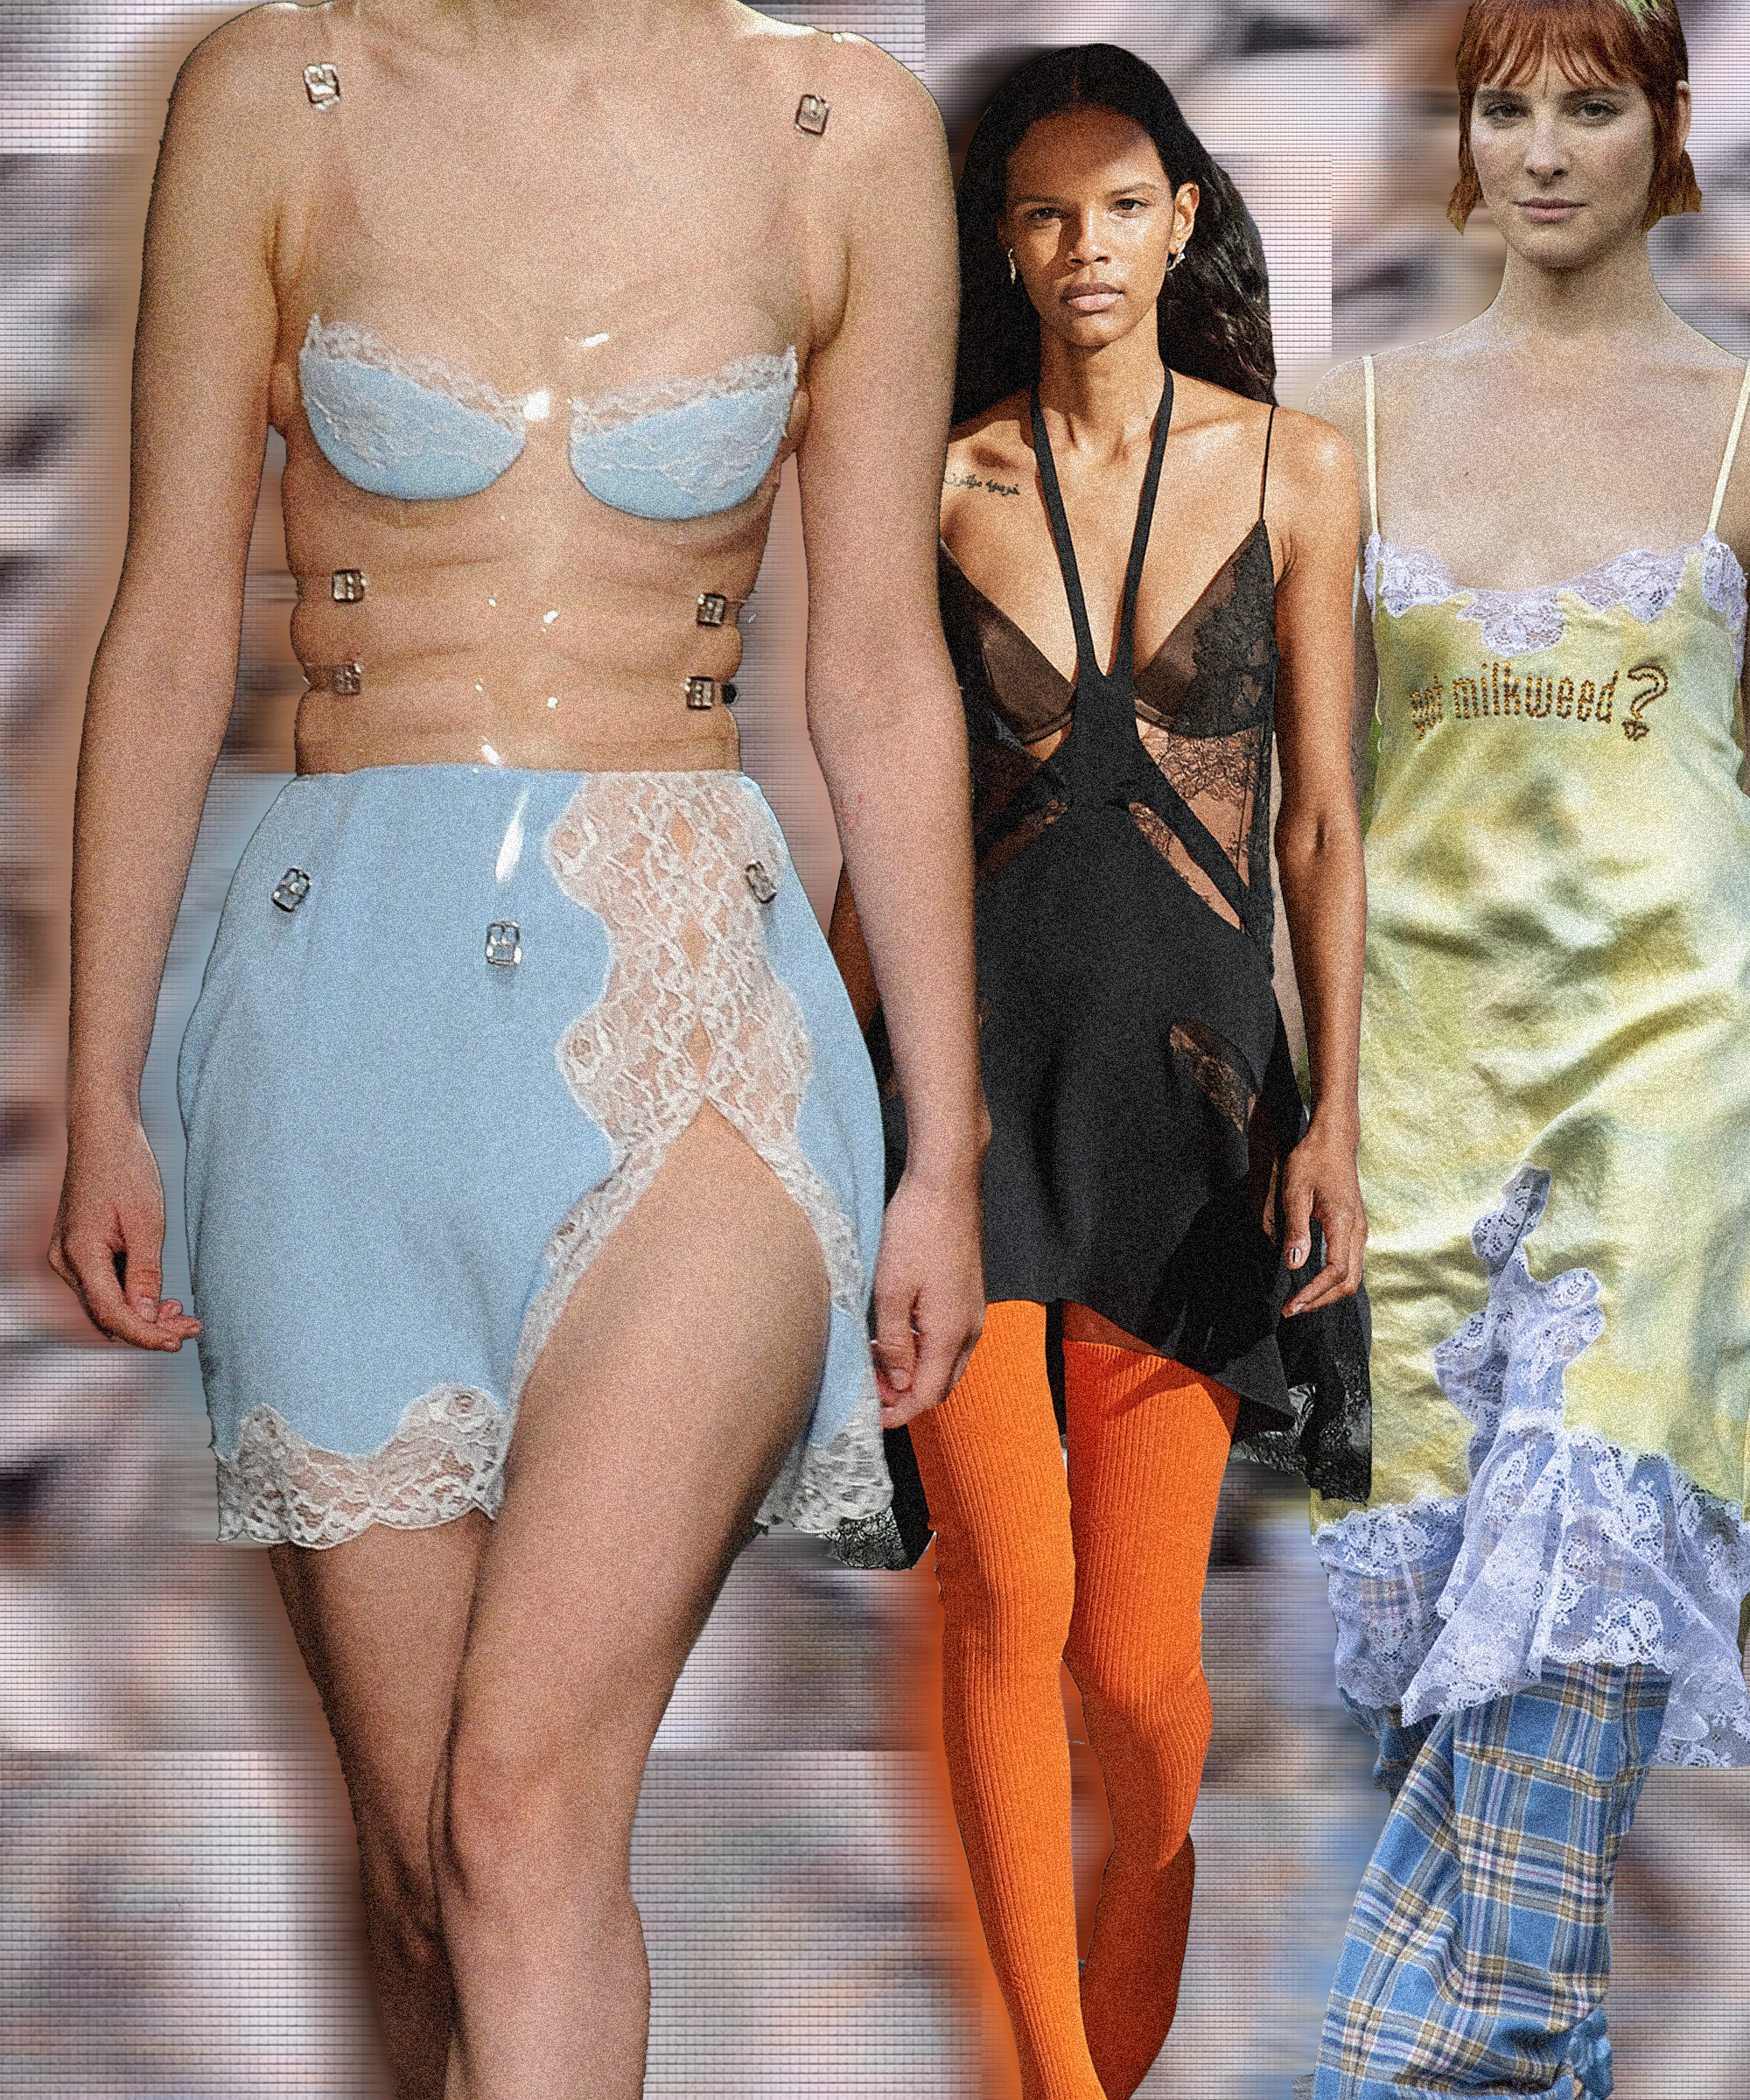 I watched the Women's Spring-Summer 2023 and I have a few thoughts